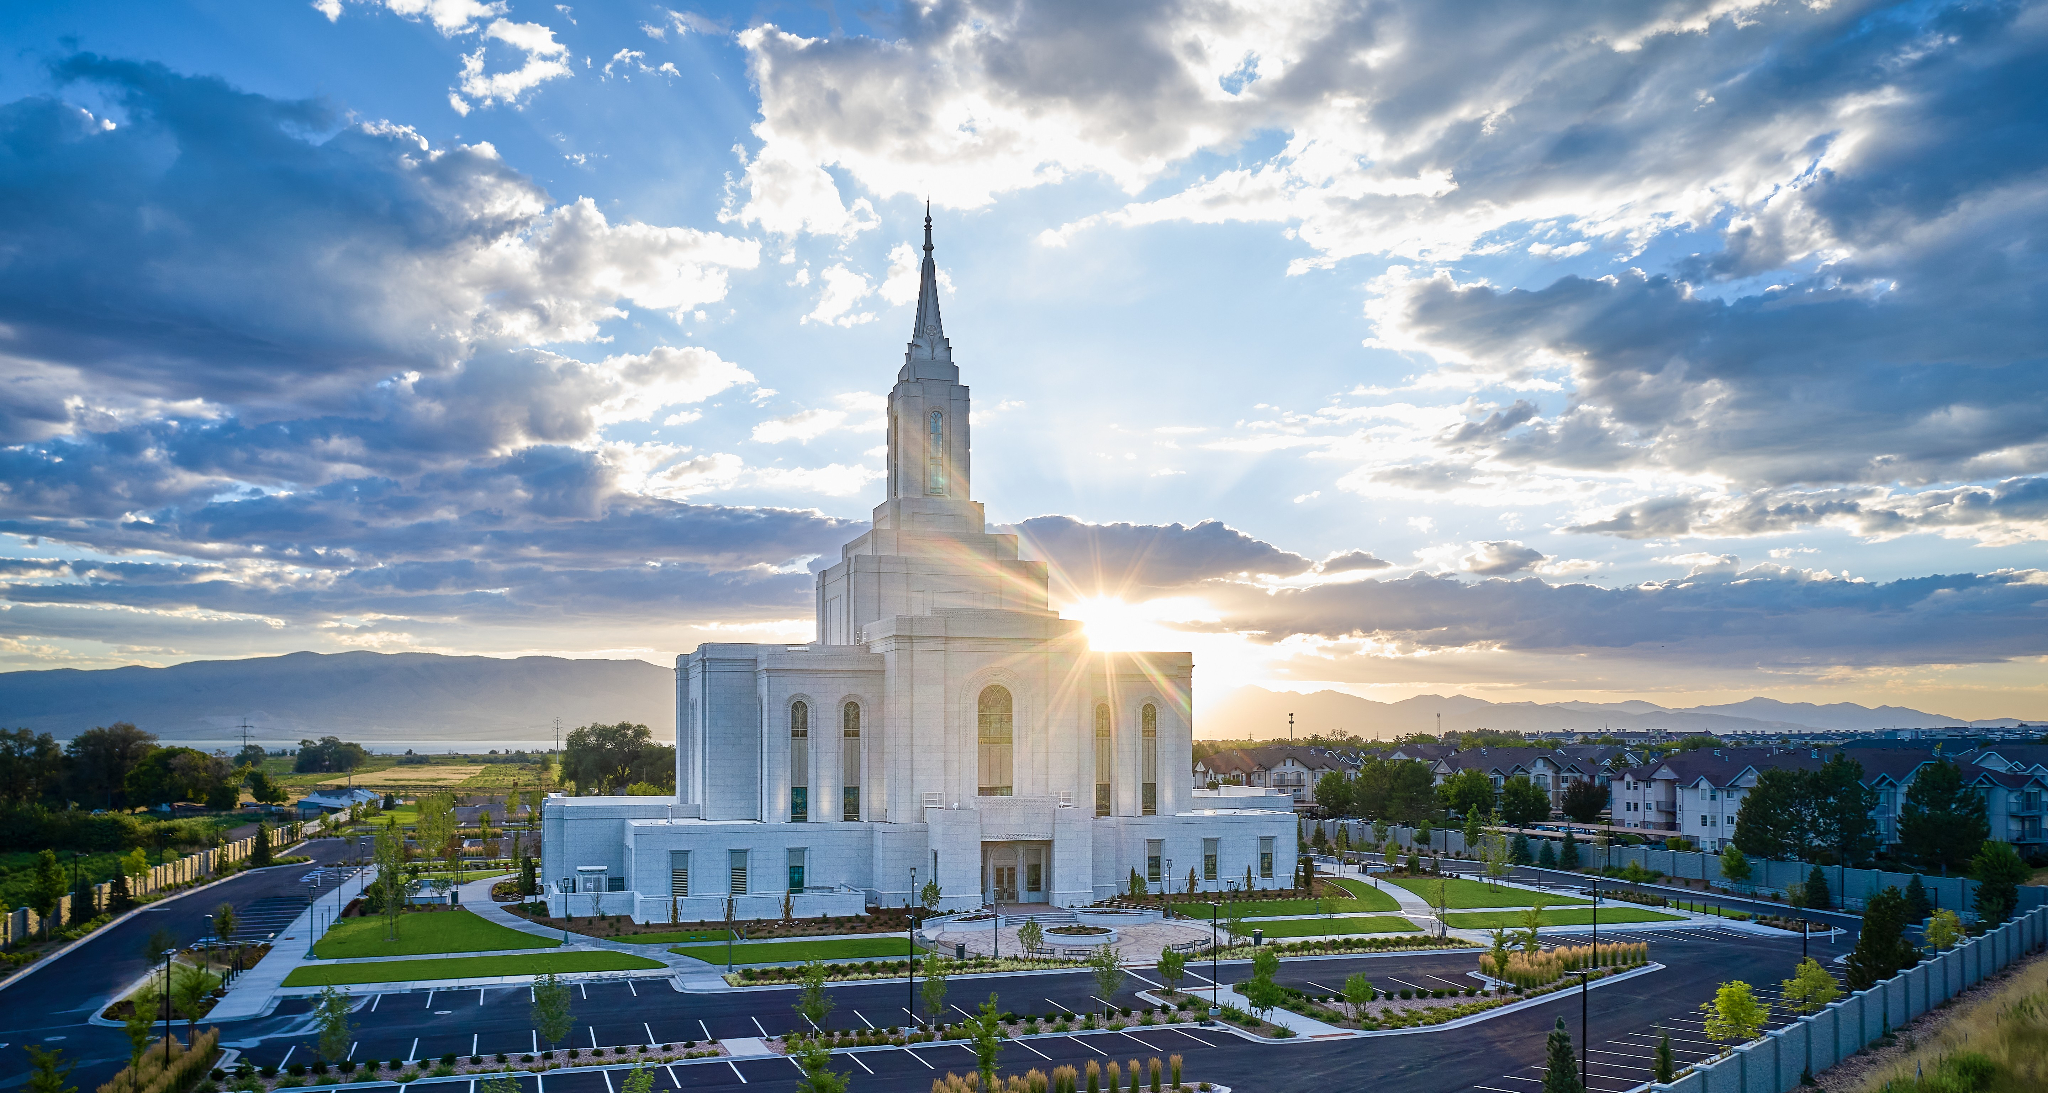 The exterior of the the Orem Utah Temple, a white building with a steeple above the center.